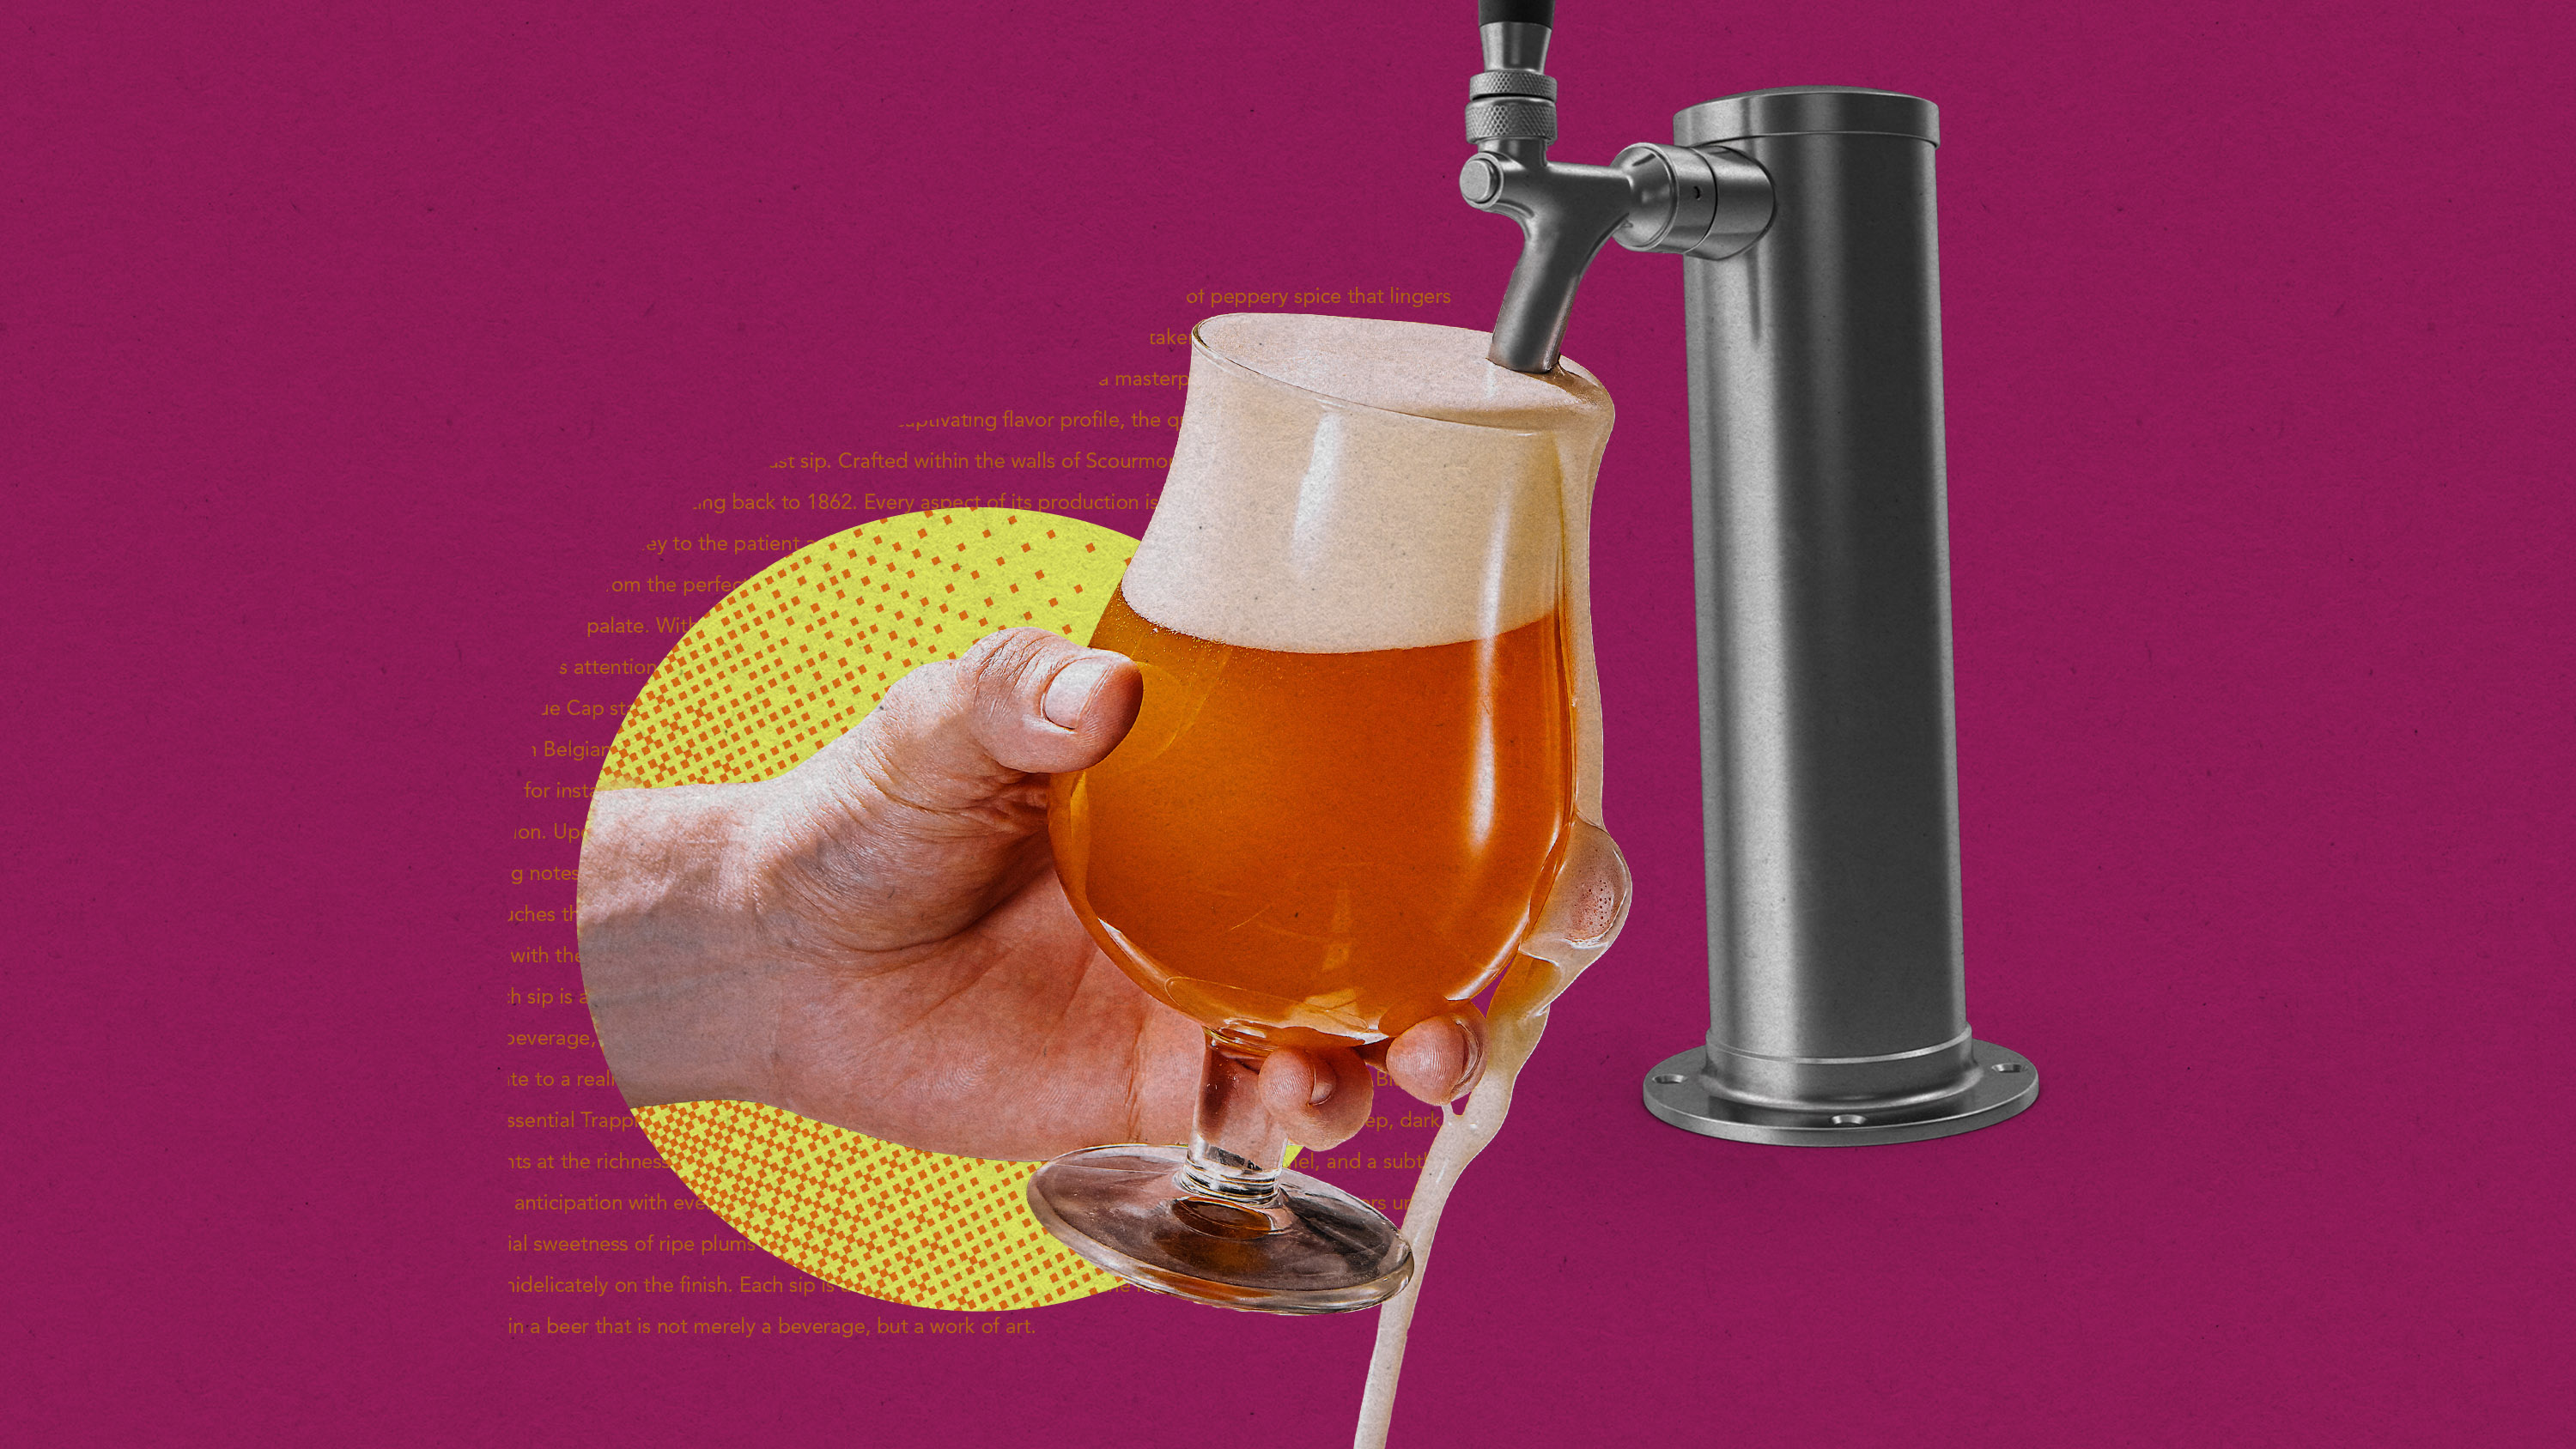 hand holding a beer glass up to the tap for a pour. Generated text and foam runs down the sides.